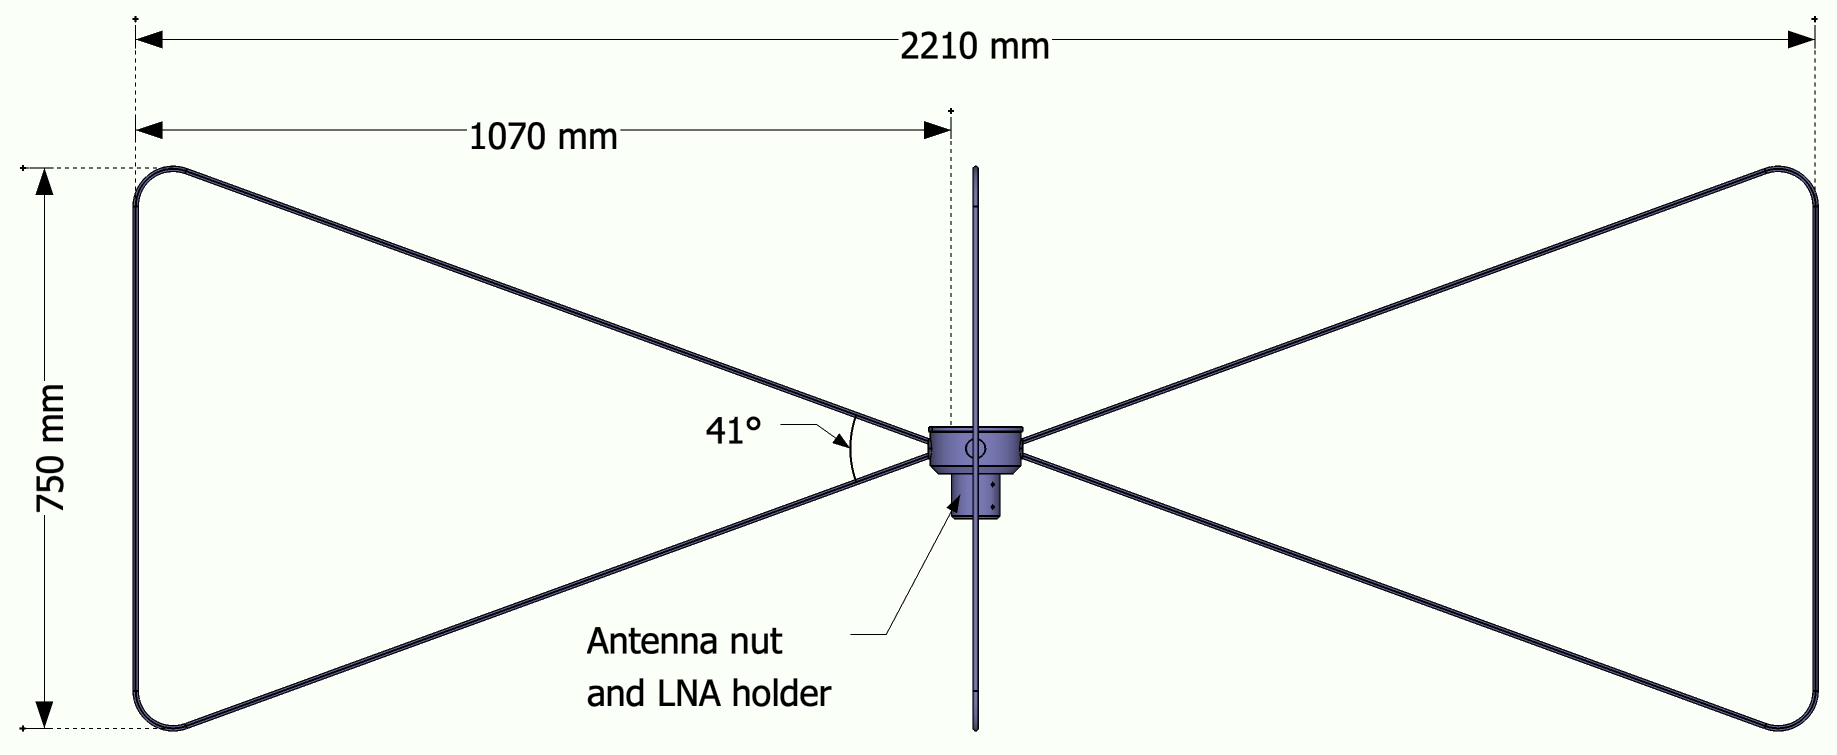 Coted drawing of the Butterfly antenna used by the autonomous stations.